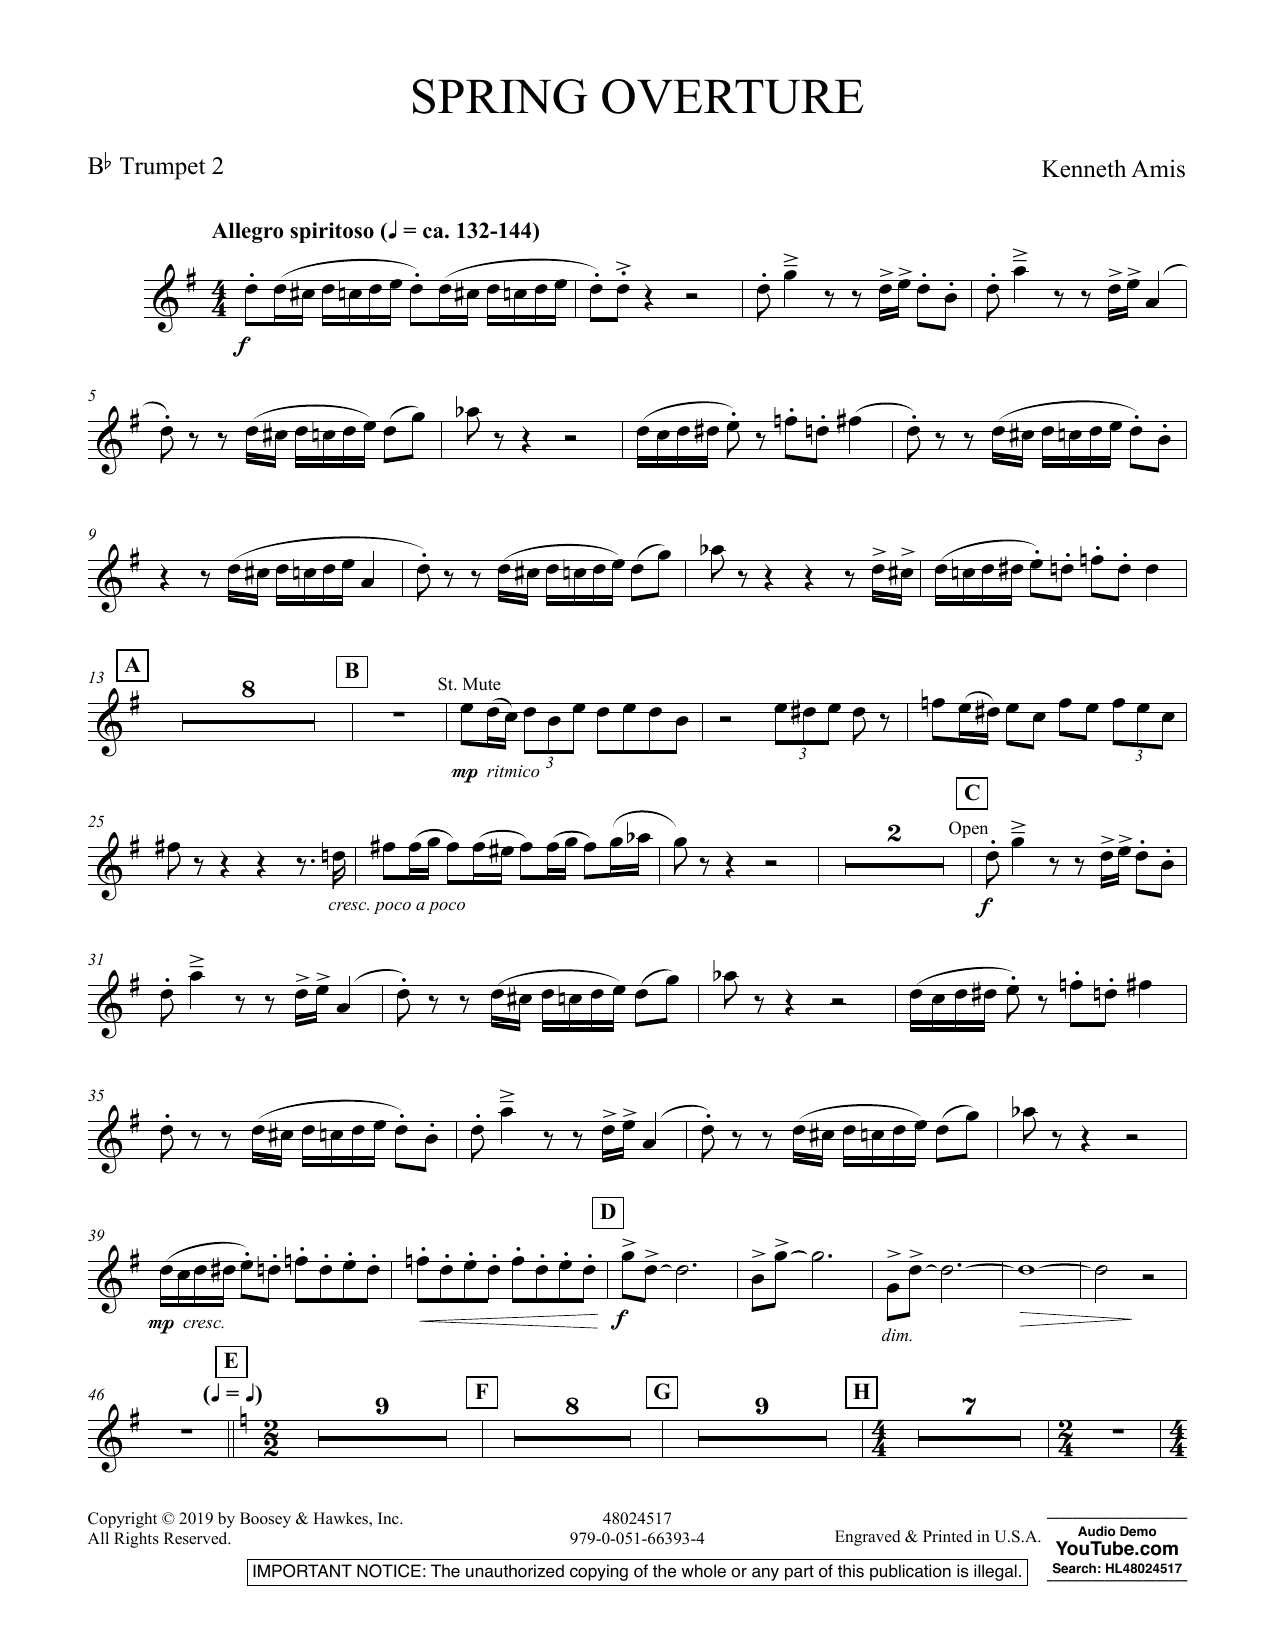 Kenneth Amis Spring Overture - Bb Trumpet 2 sheet music preview music notes and score for Concert Band including 3 page(s)